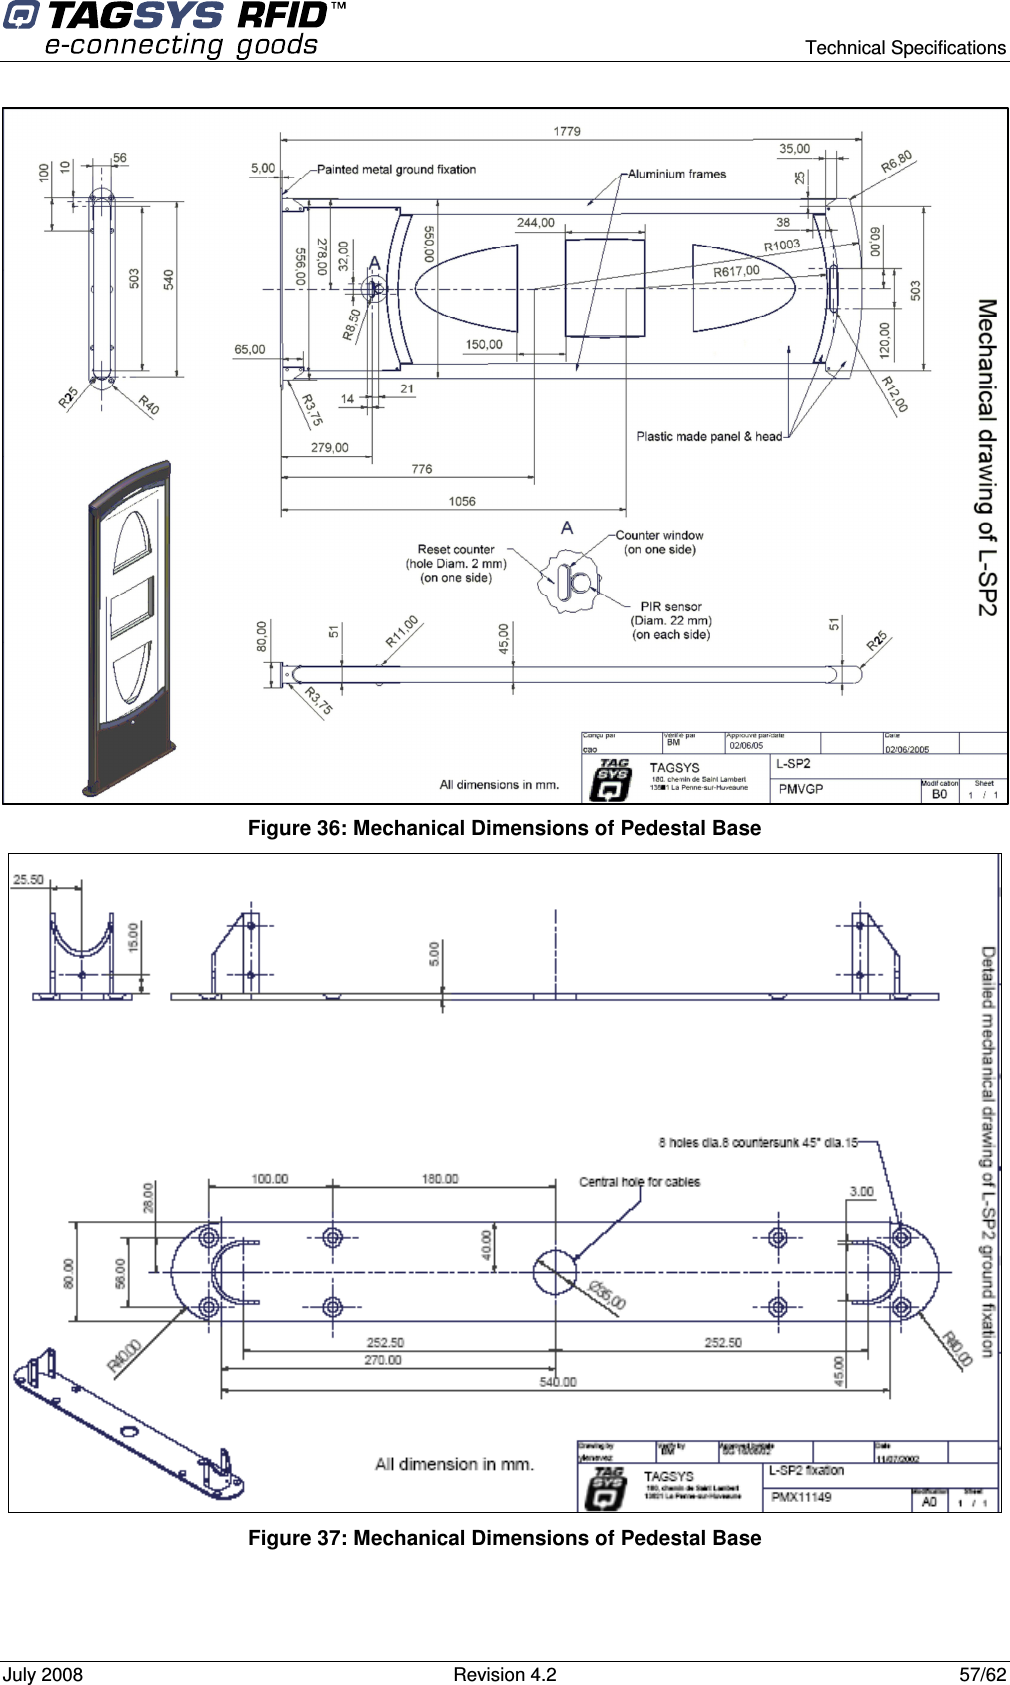      Technical Specifications July 2008  Revision 4.2  57/62 Figure 36: Mechanical Dimensions of Pedestal Base  Figure 37: Mechanical Dimensions of Pedestal Base  